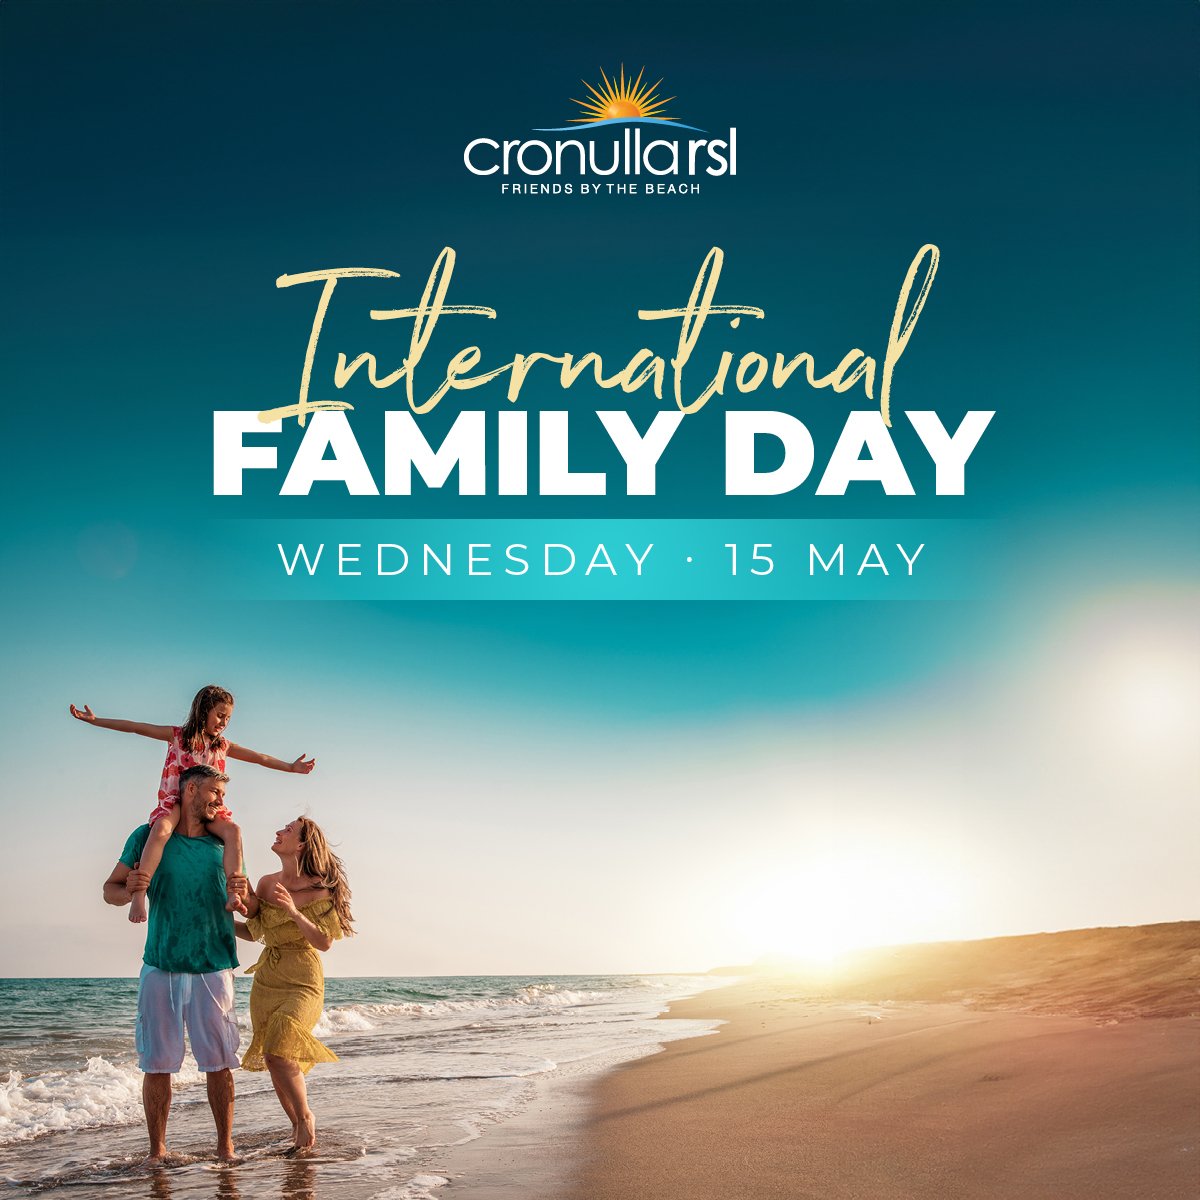 🌍✨ Let's celebrate International Family Day together on Wednesday, May 15th! It's a day to honour the importance of family bonds and the love that unites us all!

See you at Cronulla RSL! 

#cronullarsl #familyday #cronulla #cronullabeach